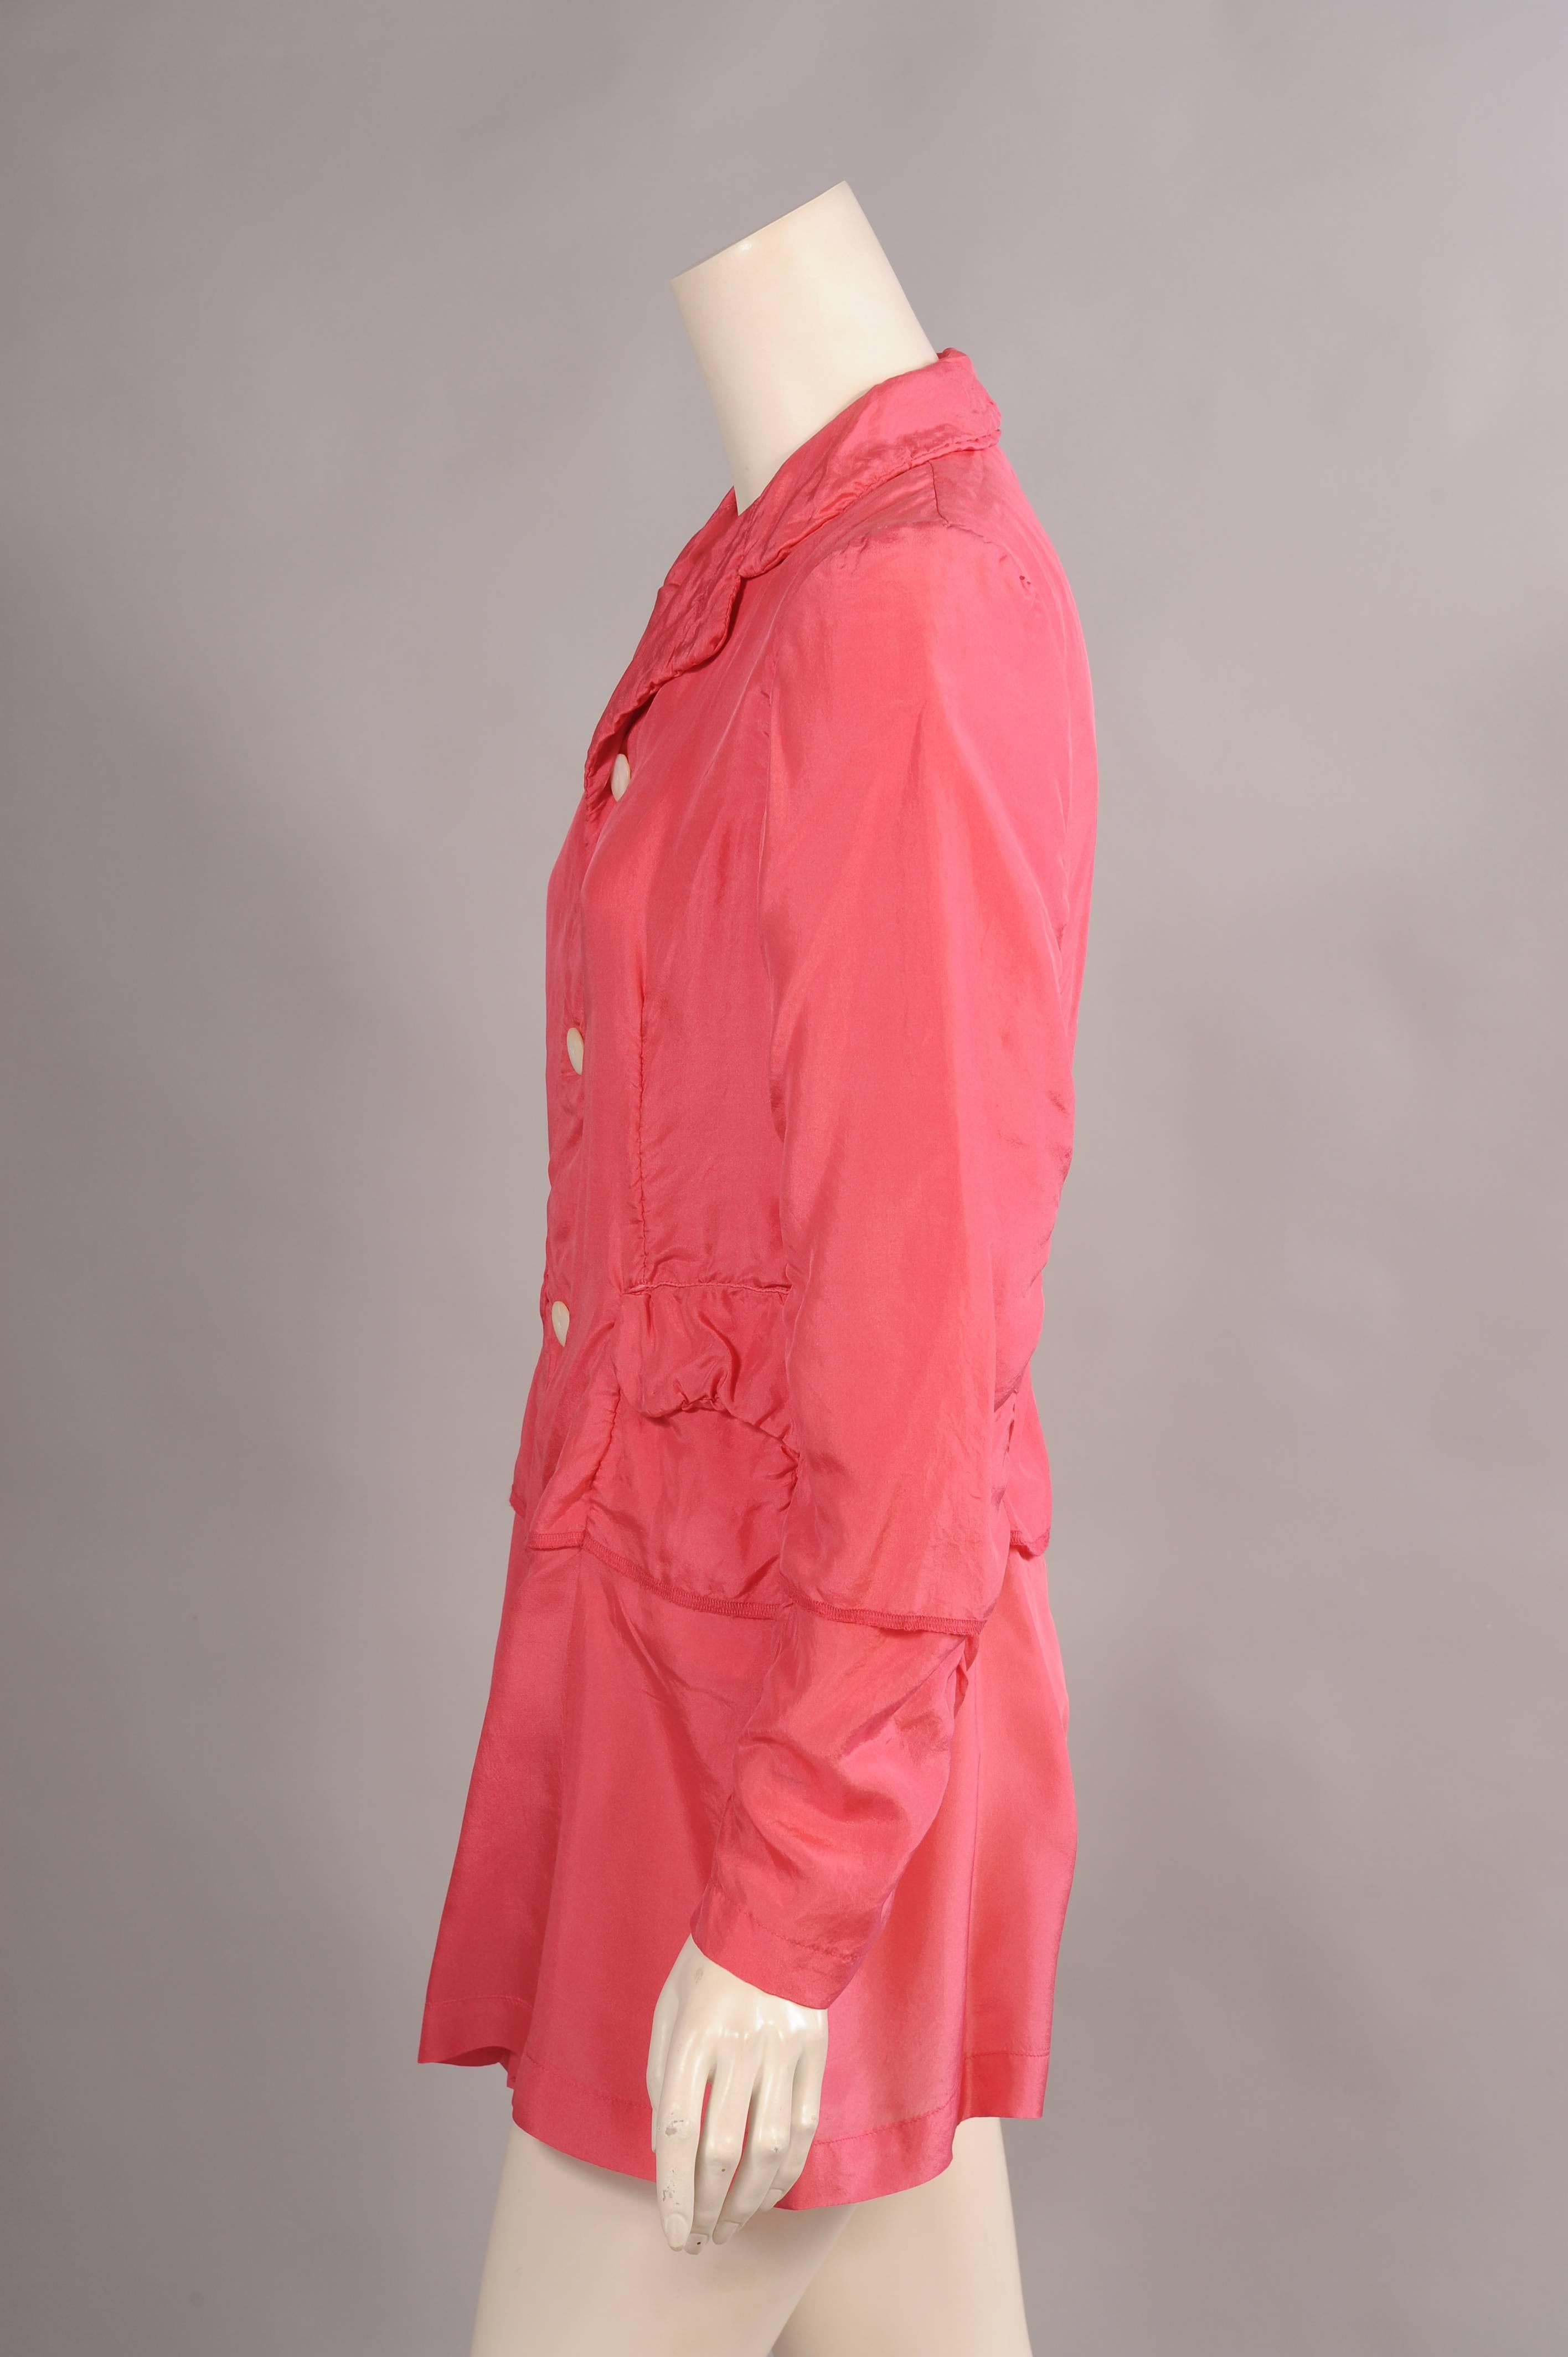 A modern take on the classic three button blazer, this piece from Comme des Garcons is made from two layers of pink silk. The jacket has a notched collar, three buttons and two flap pockets. The seams are lightly gathered and the lining extends